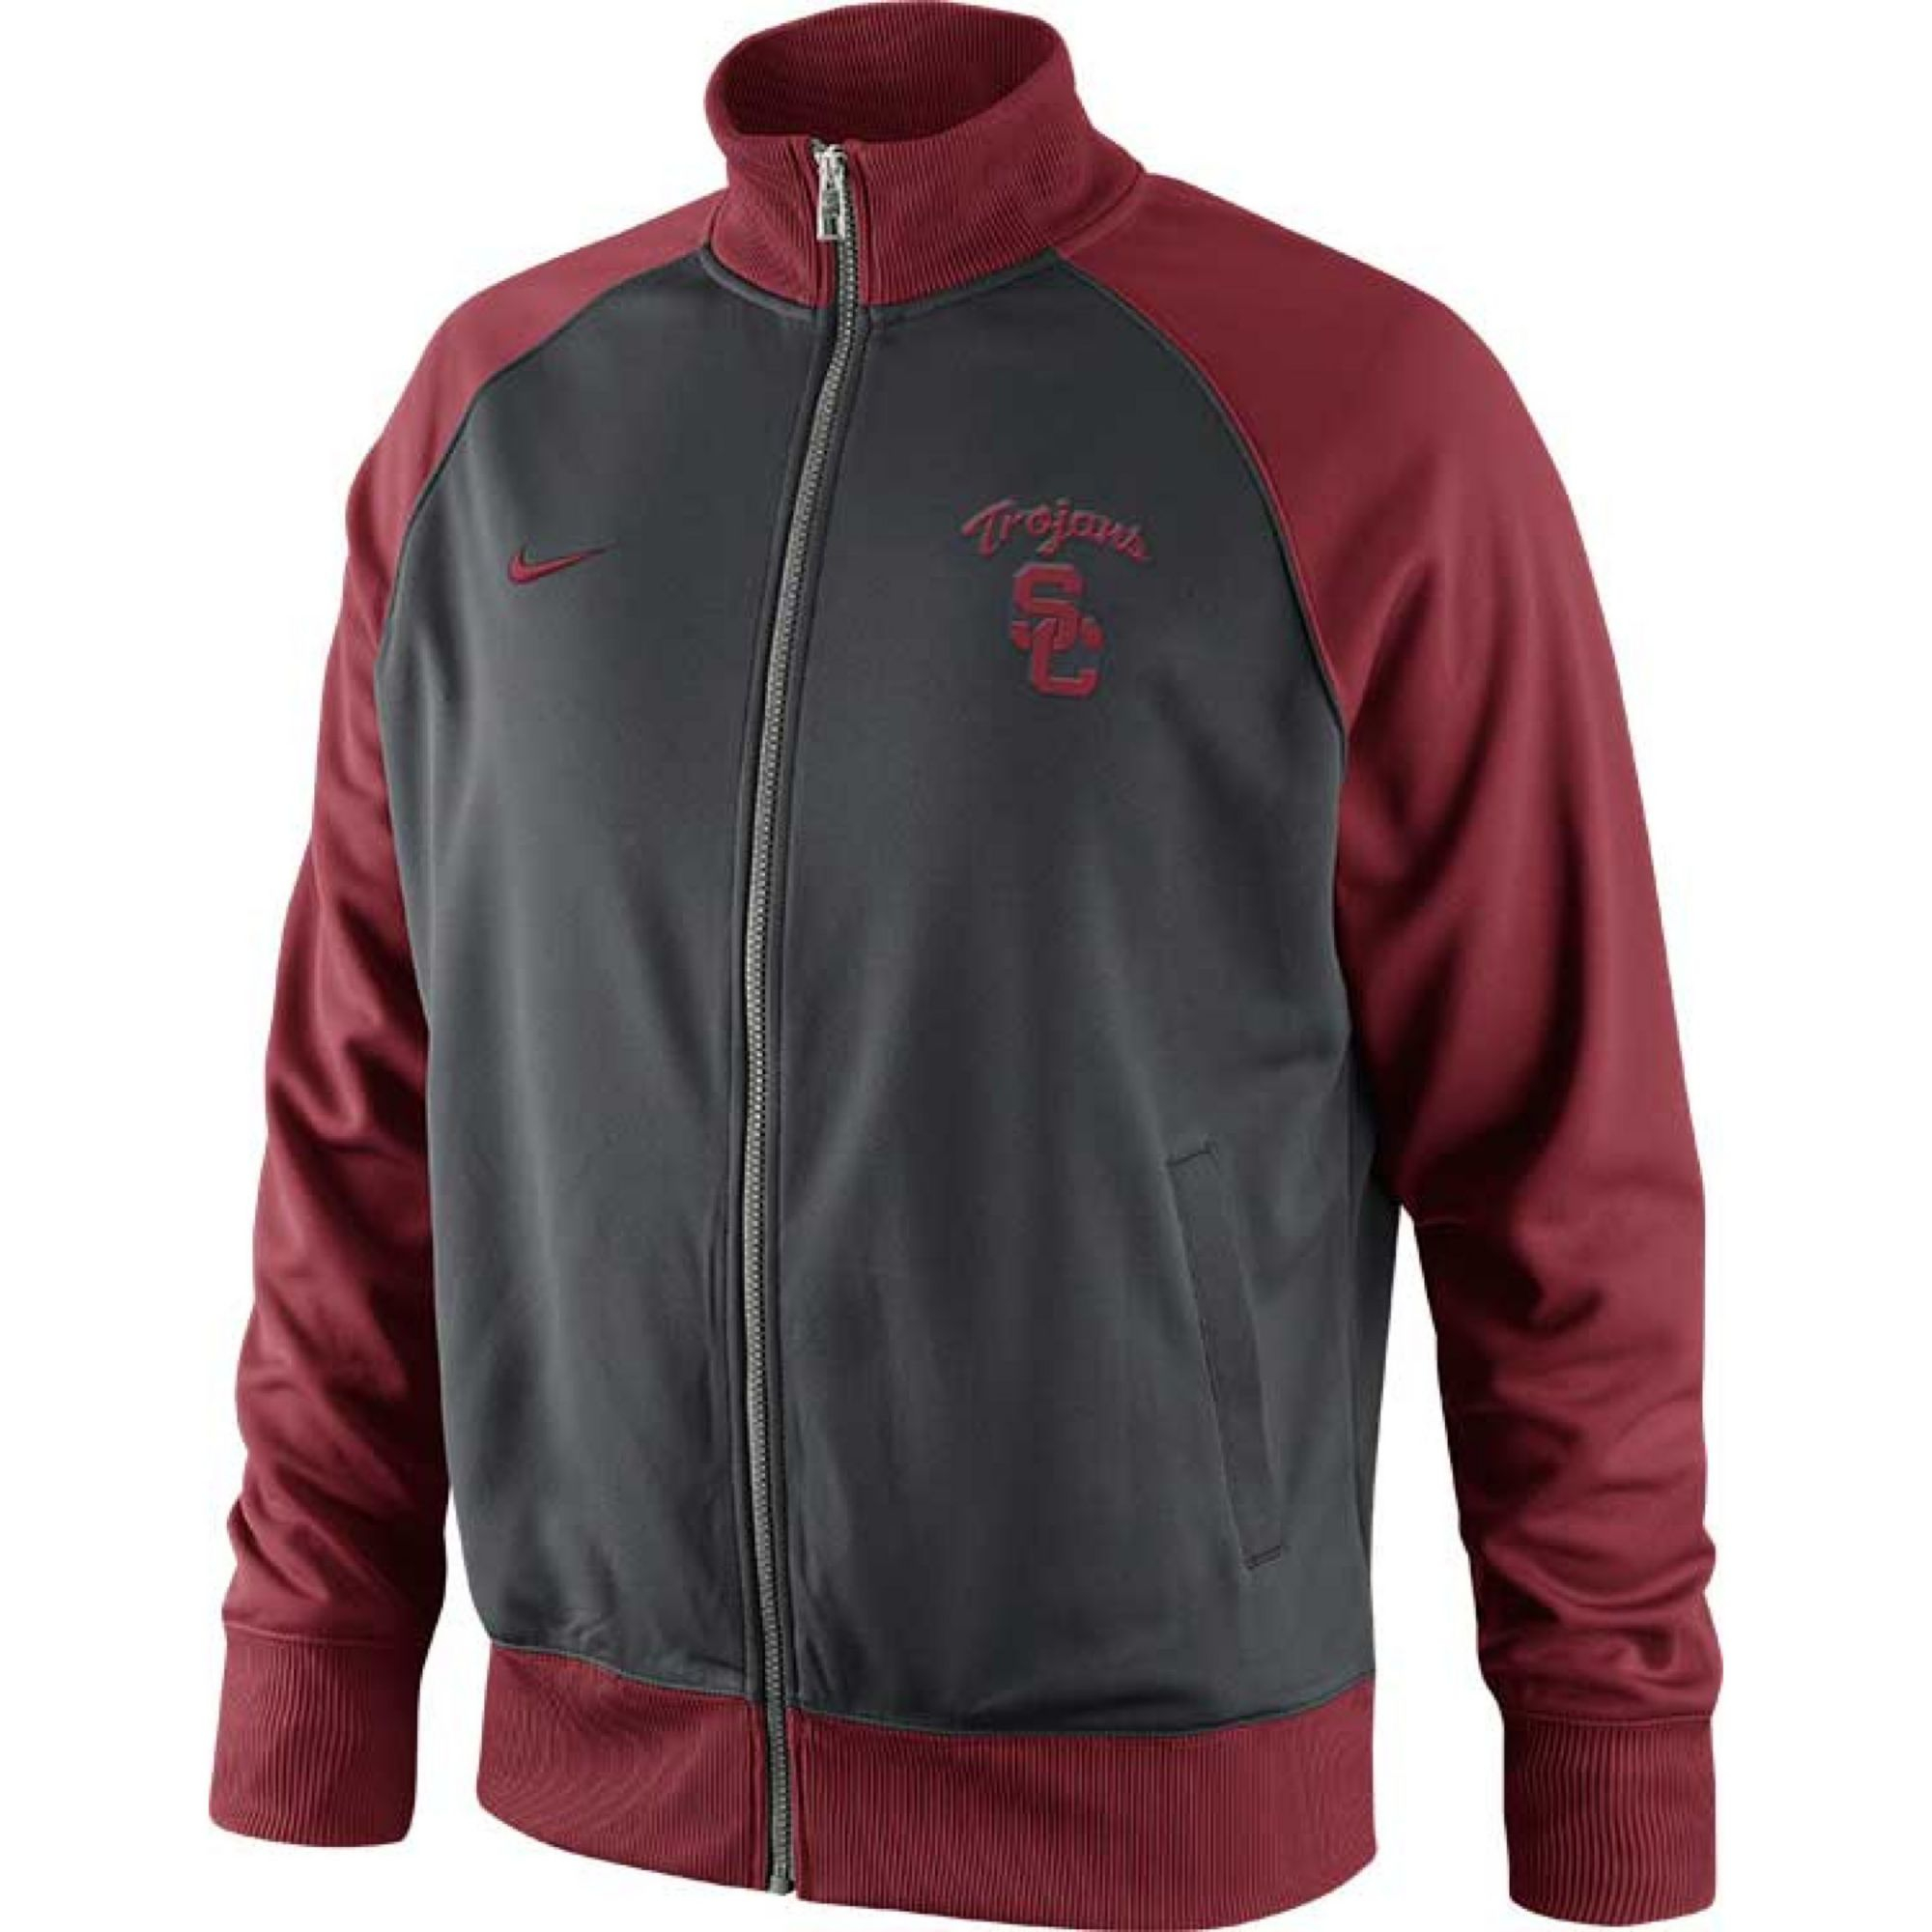 Lyst - Nike Mens Usc Trojans Fashion Track Jacket in Red for Men